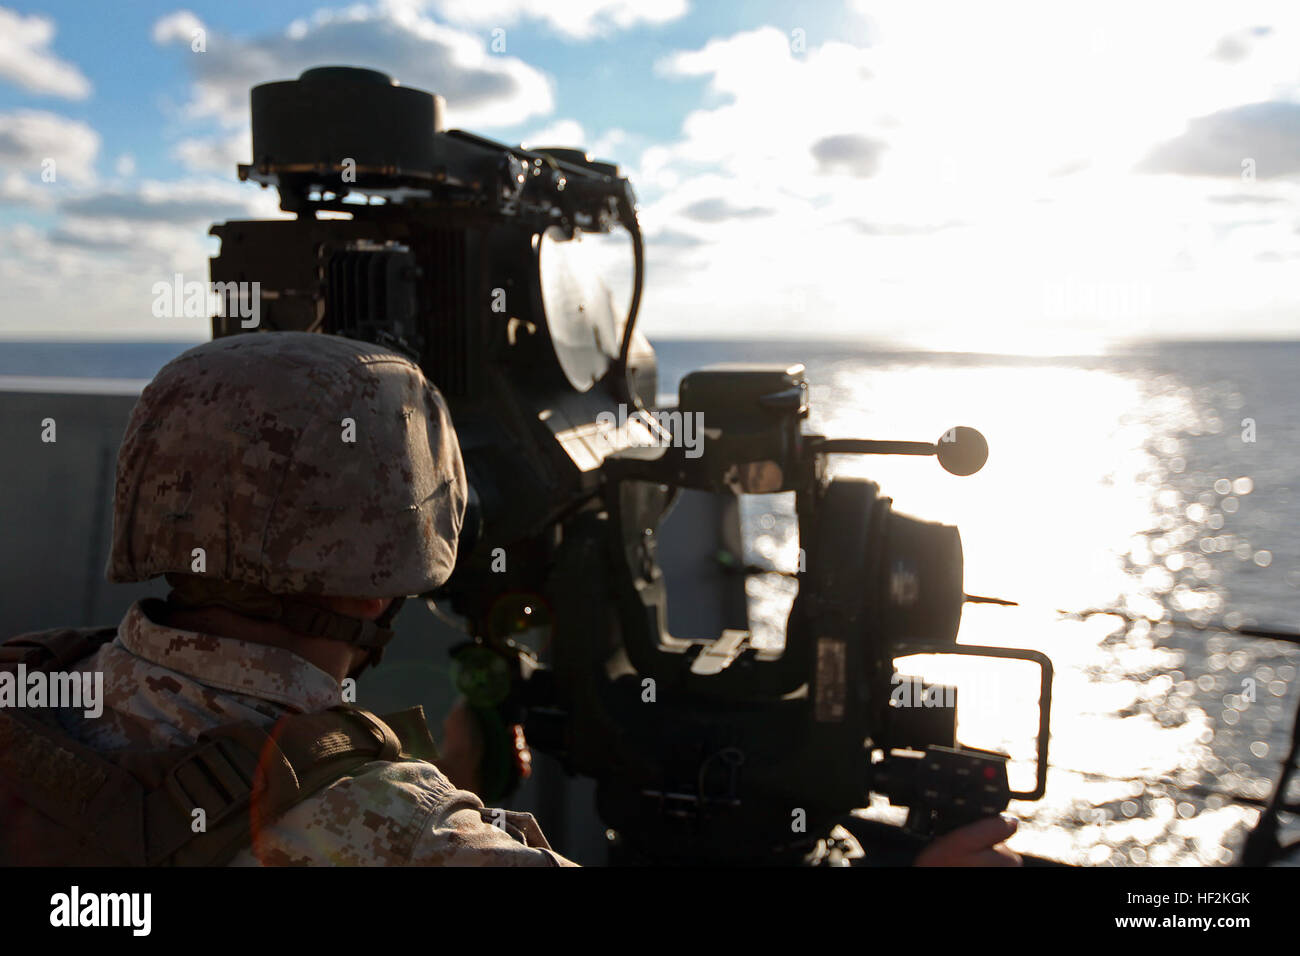 A Marine with Battalion Landing Team 3rd Battalion, 6th Marine Regiment, 24th Marine Expeditionary Unit, looks through an M41A4 Saber System during a simulated strait transit aboard the USS New York, Oct. 24, 2014. Embarked Marines often support amphibious ships during strait transits when the ship is most vulnerable to attack. A contingent of the 24th MEU is embarked aboard the New York during Composite Training Unit Exercise, the MEU’s final training event before their deployment at the end of the year. (U.S. Marine Corps photo by 1st Lt. Joshua W. Larson) A Week at Sea Aboard the USS New Yo Stock Photo